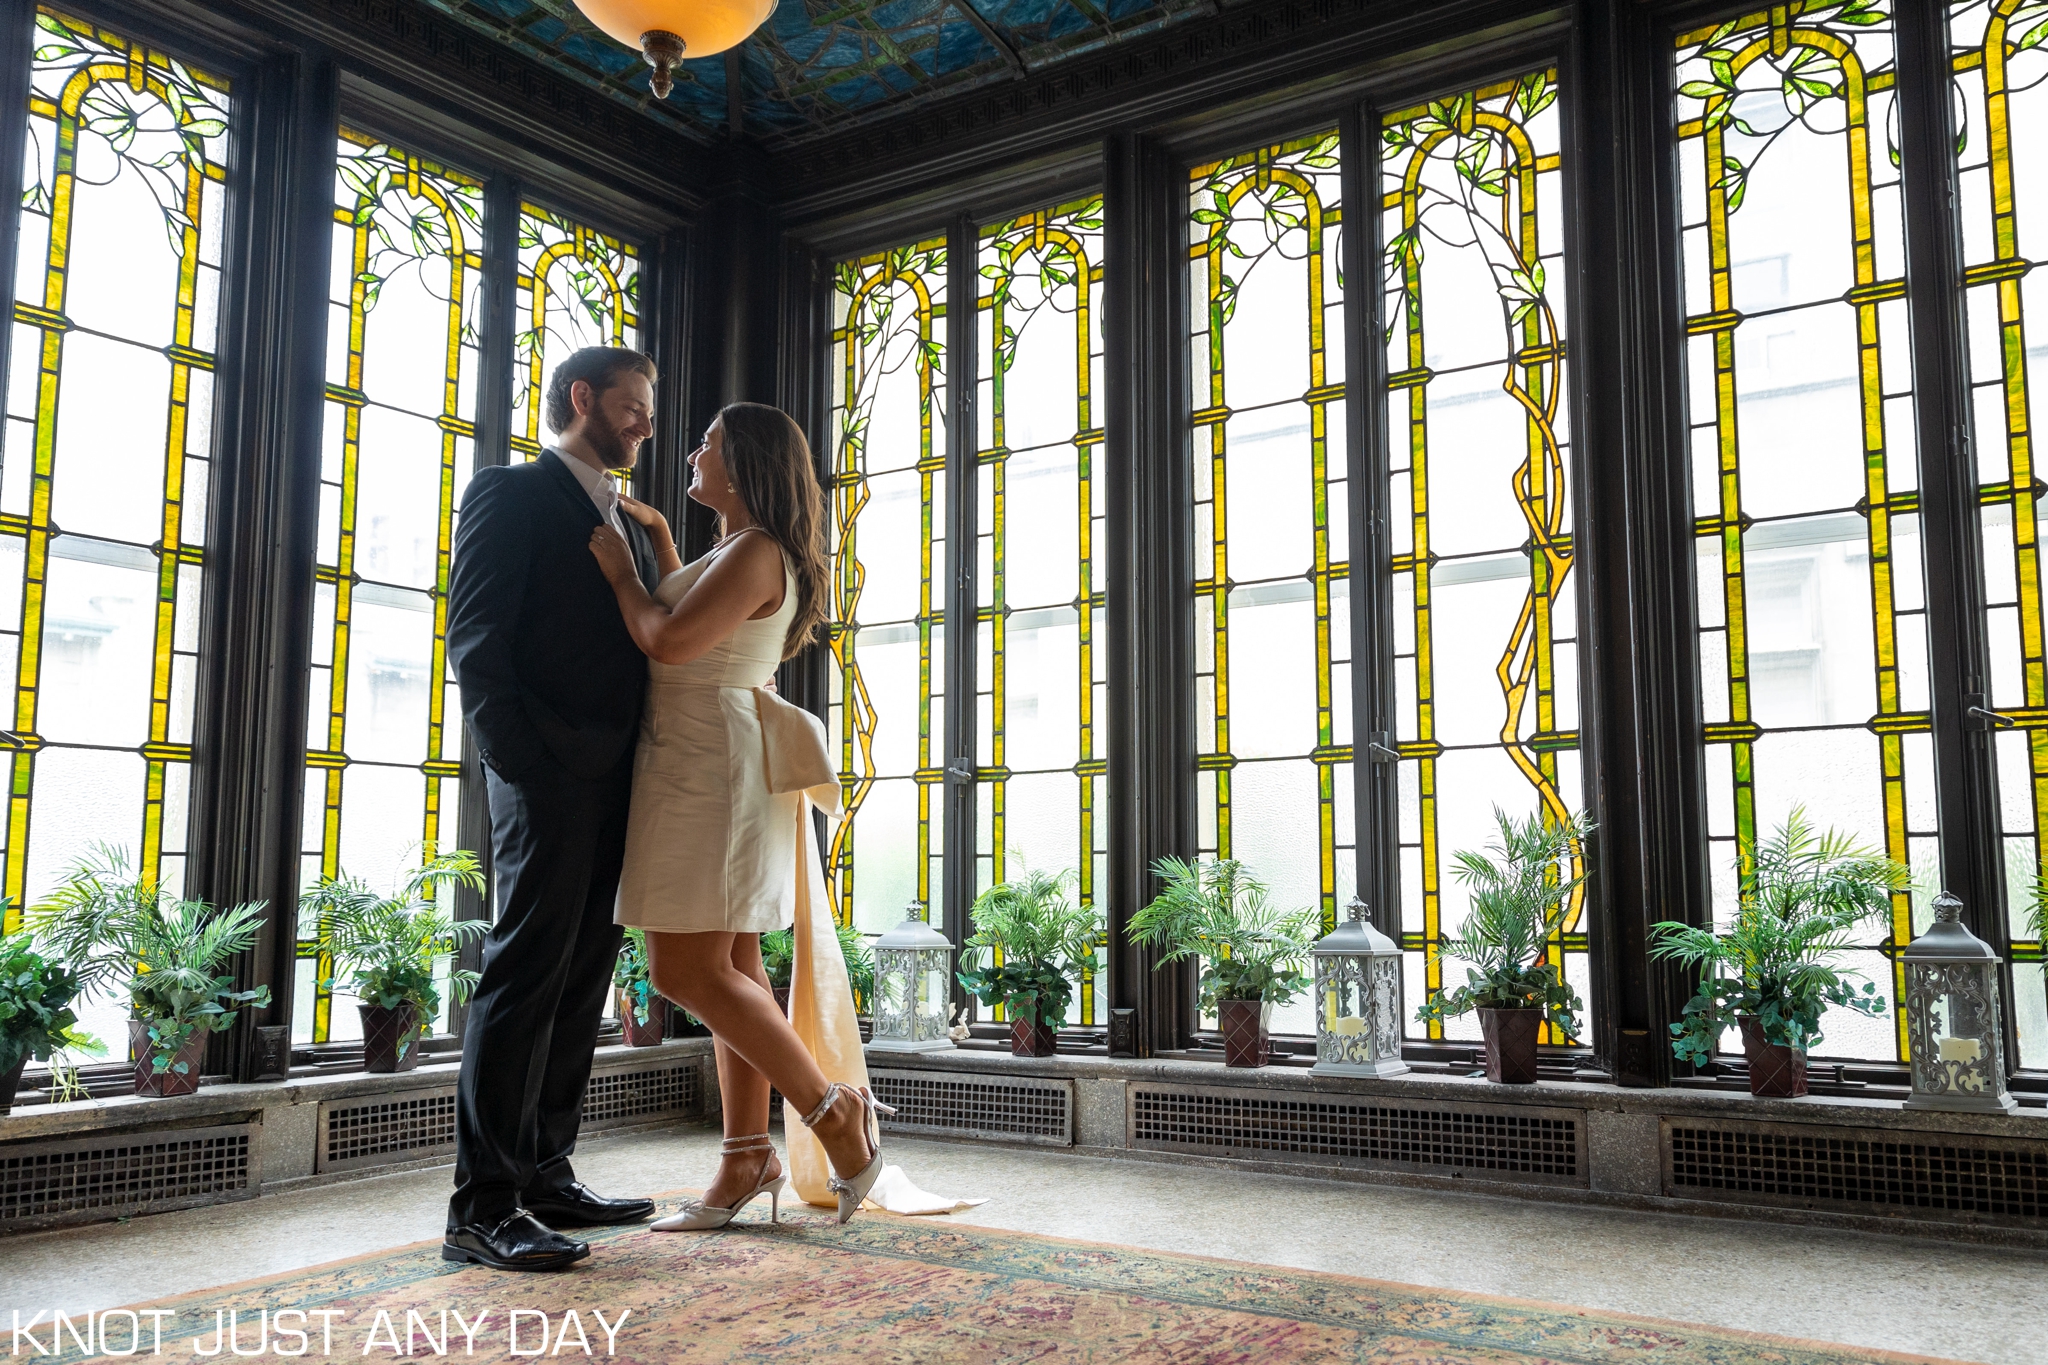 Wilkes-Barre, PA Engagement Photography Session At Mary Stegmaier Mansion 